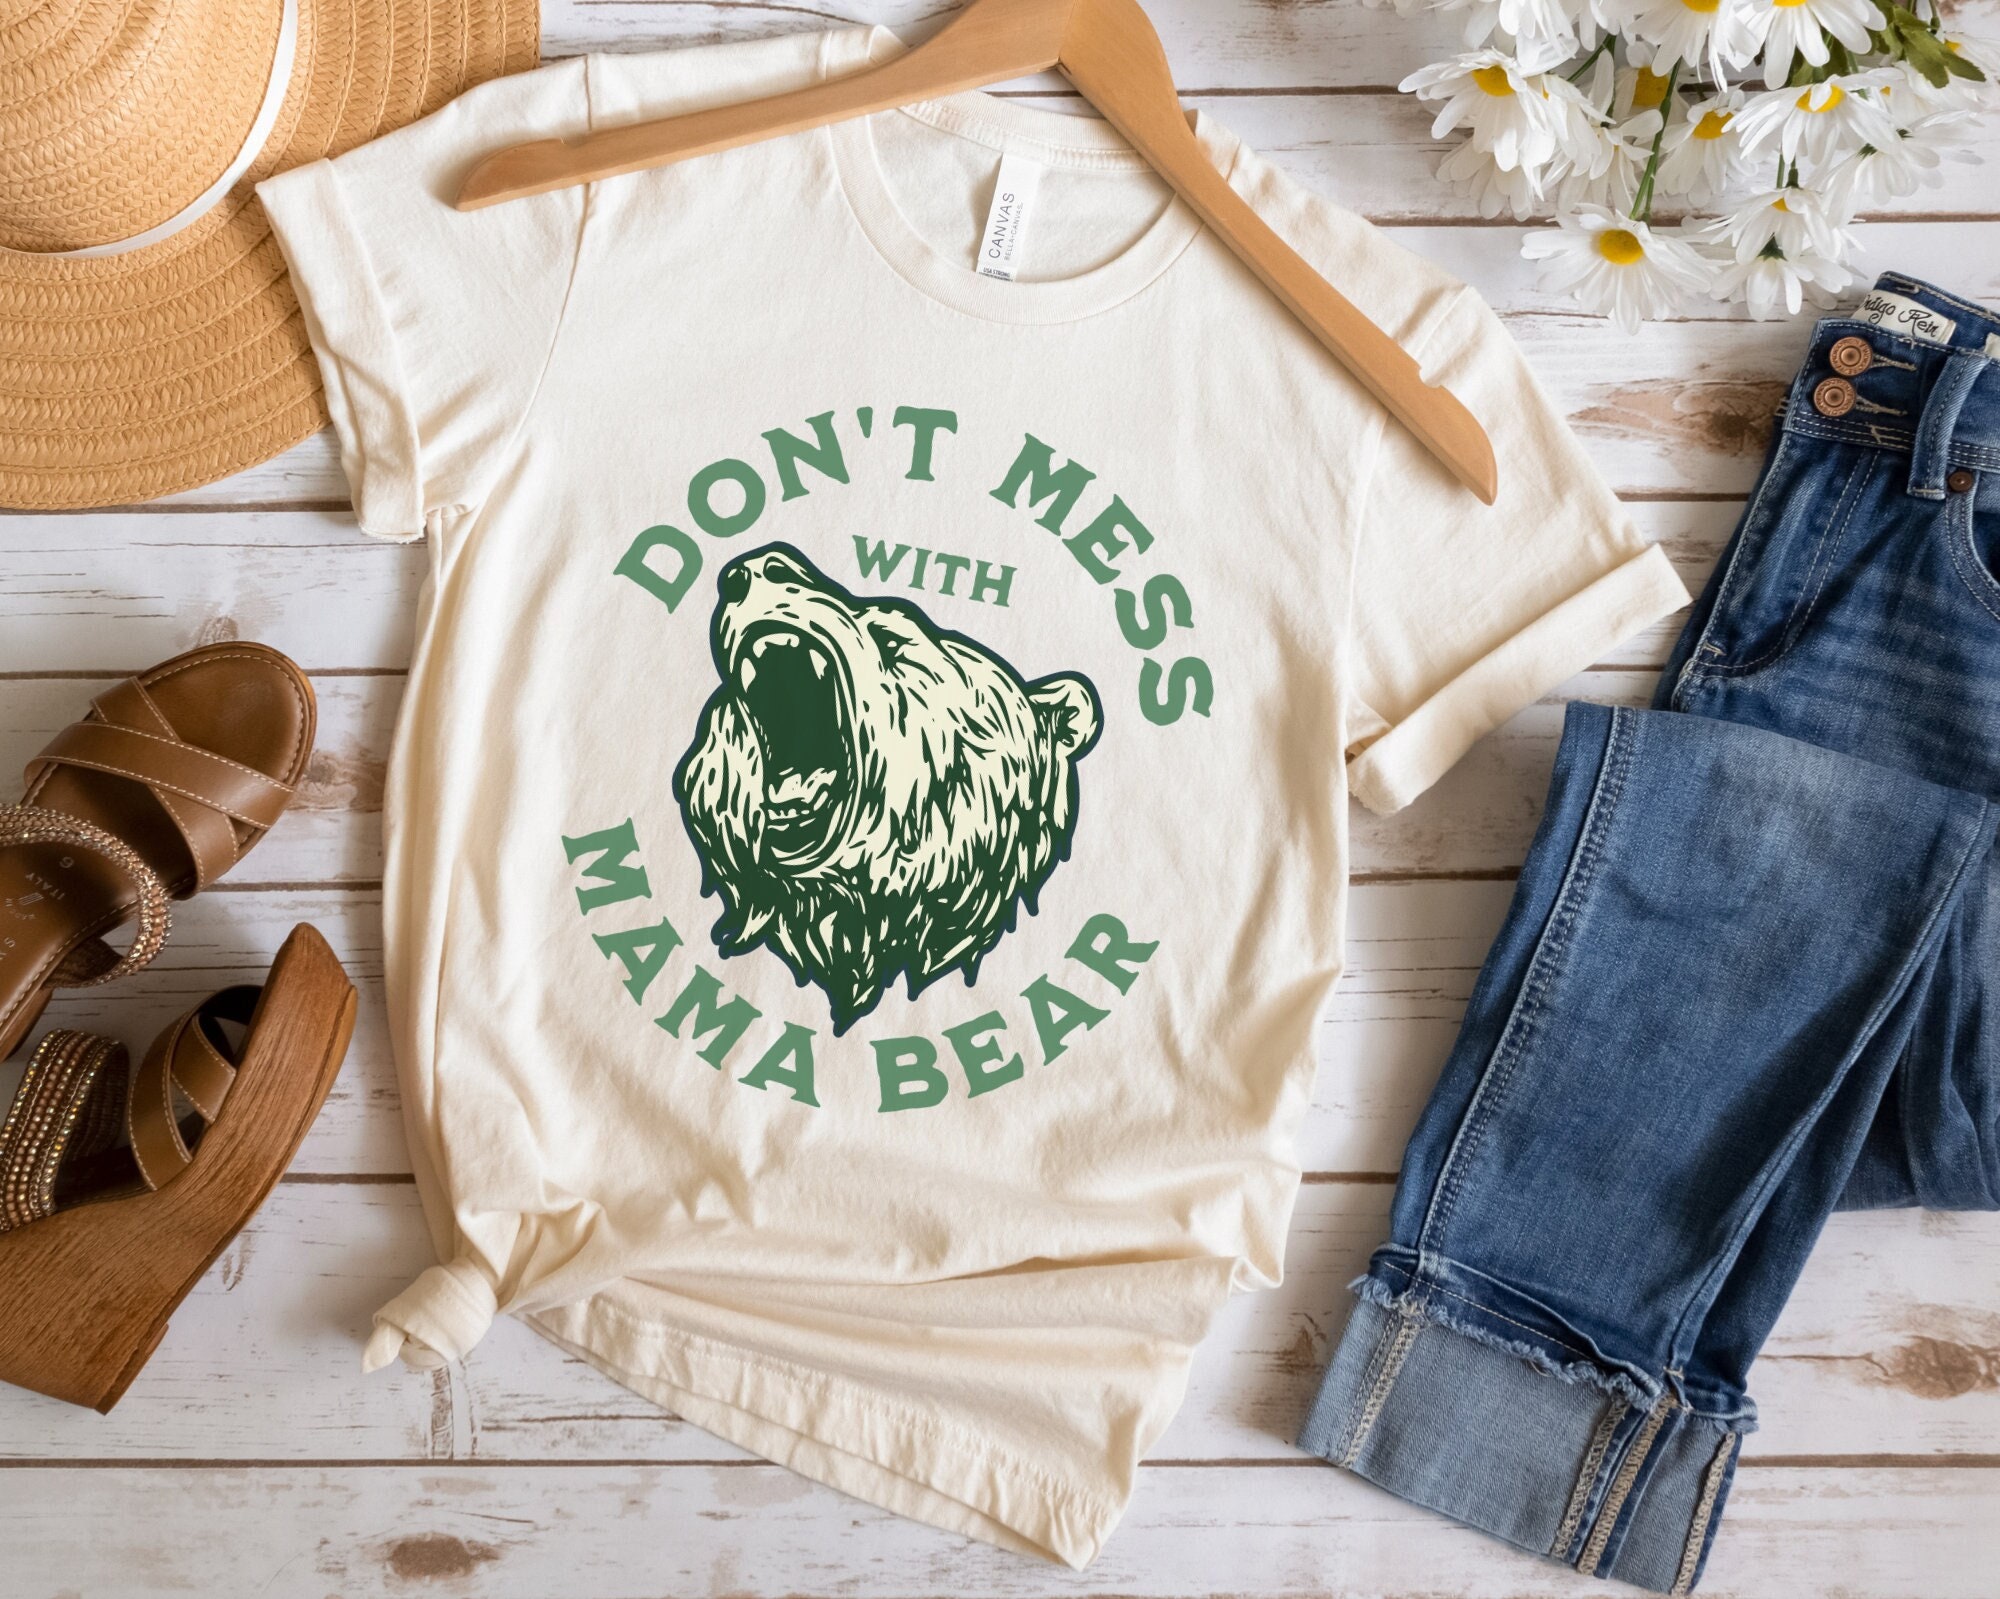 Don't Mess with Mama Bear Tee, Athletic Heather / L